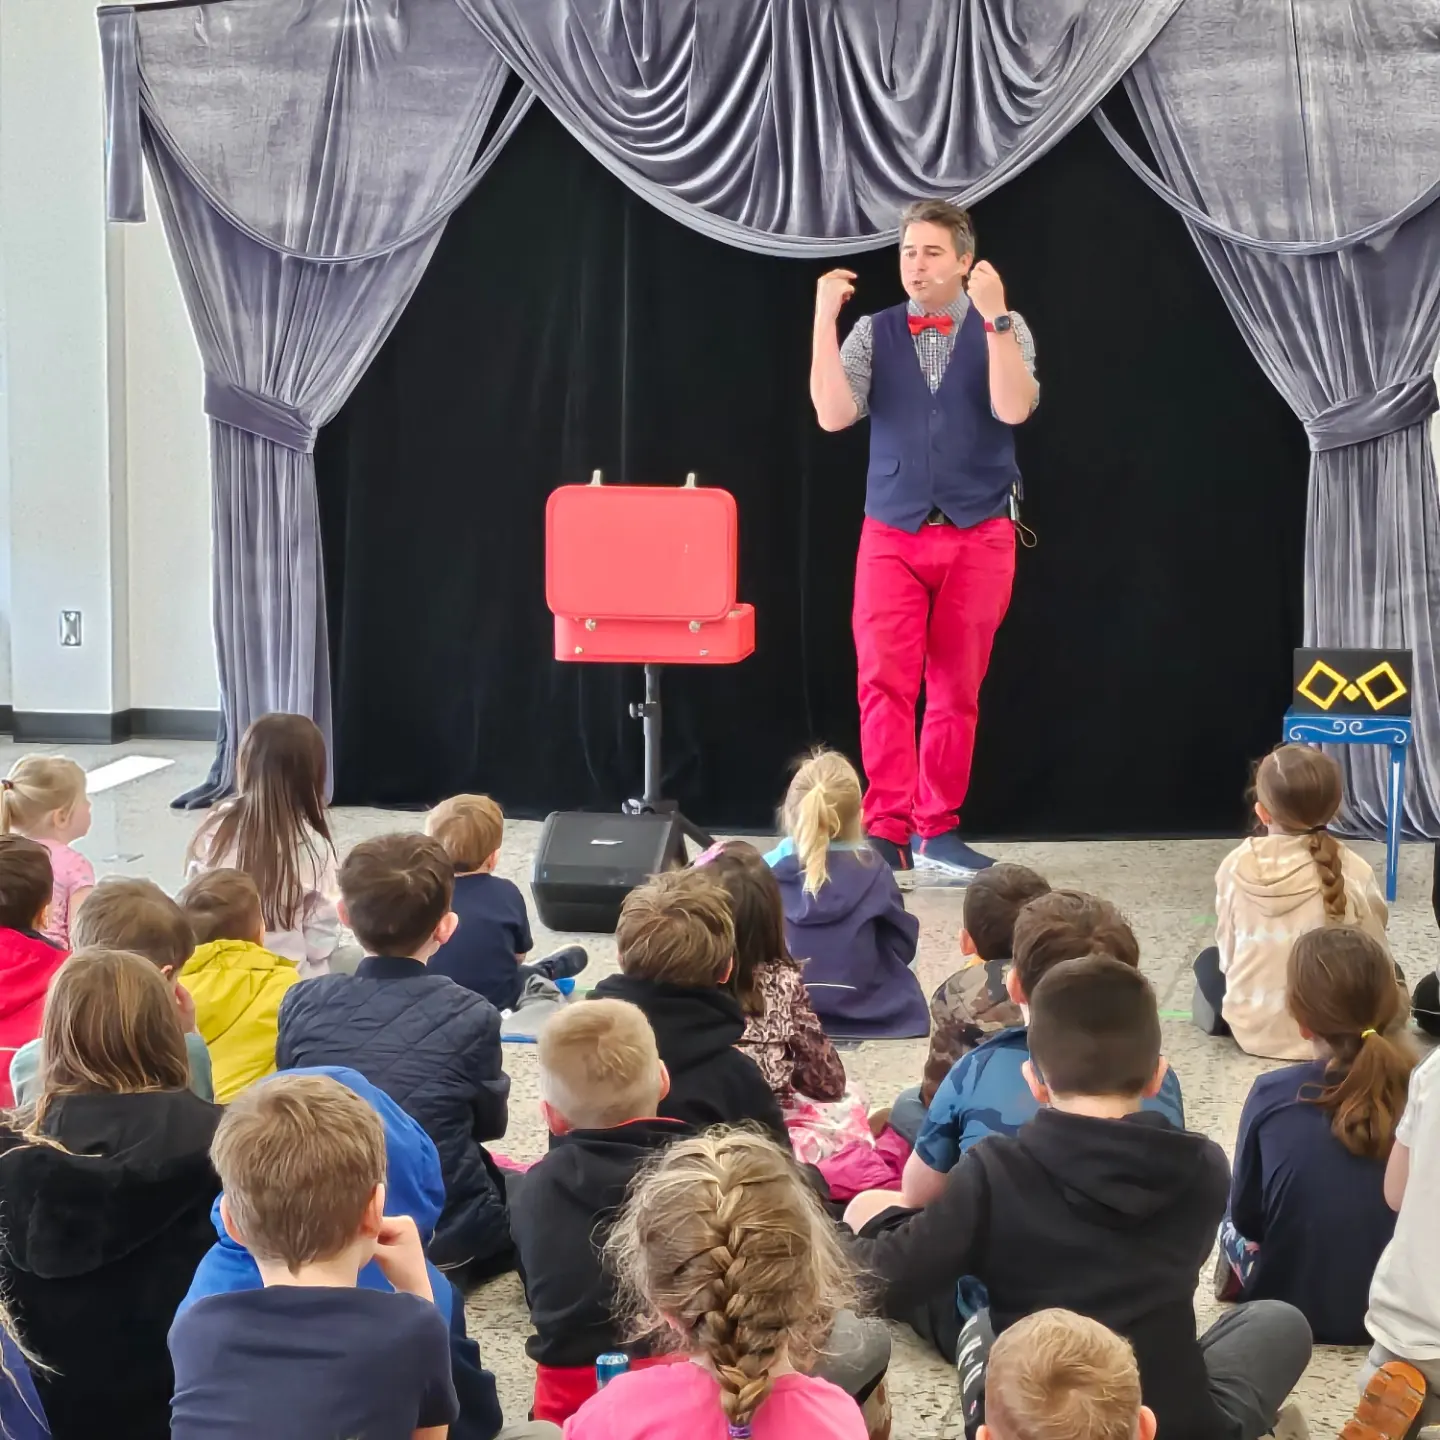 magic show, large crowd with magician at front